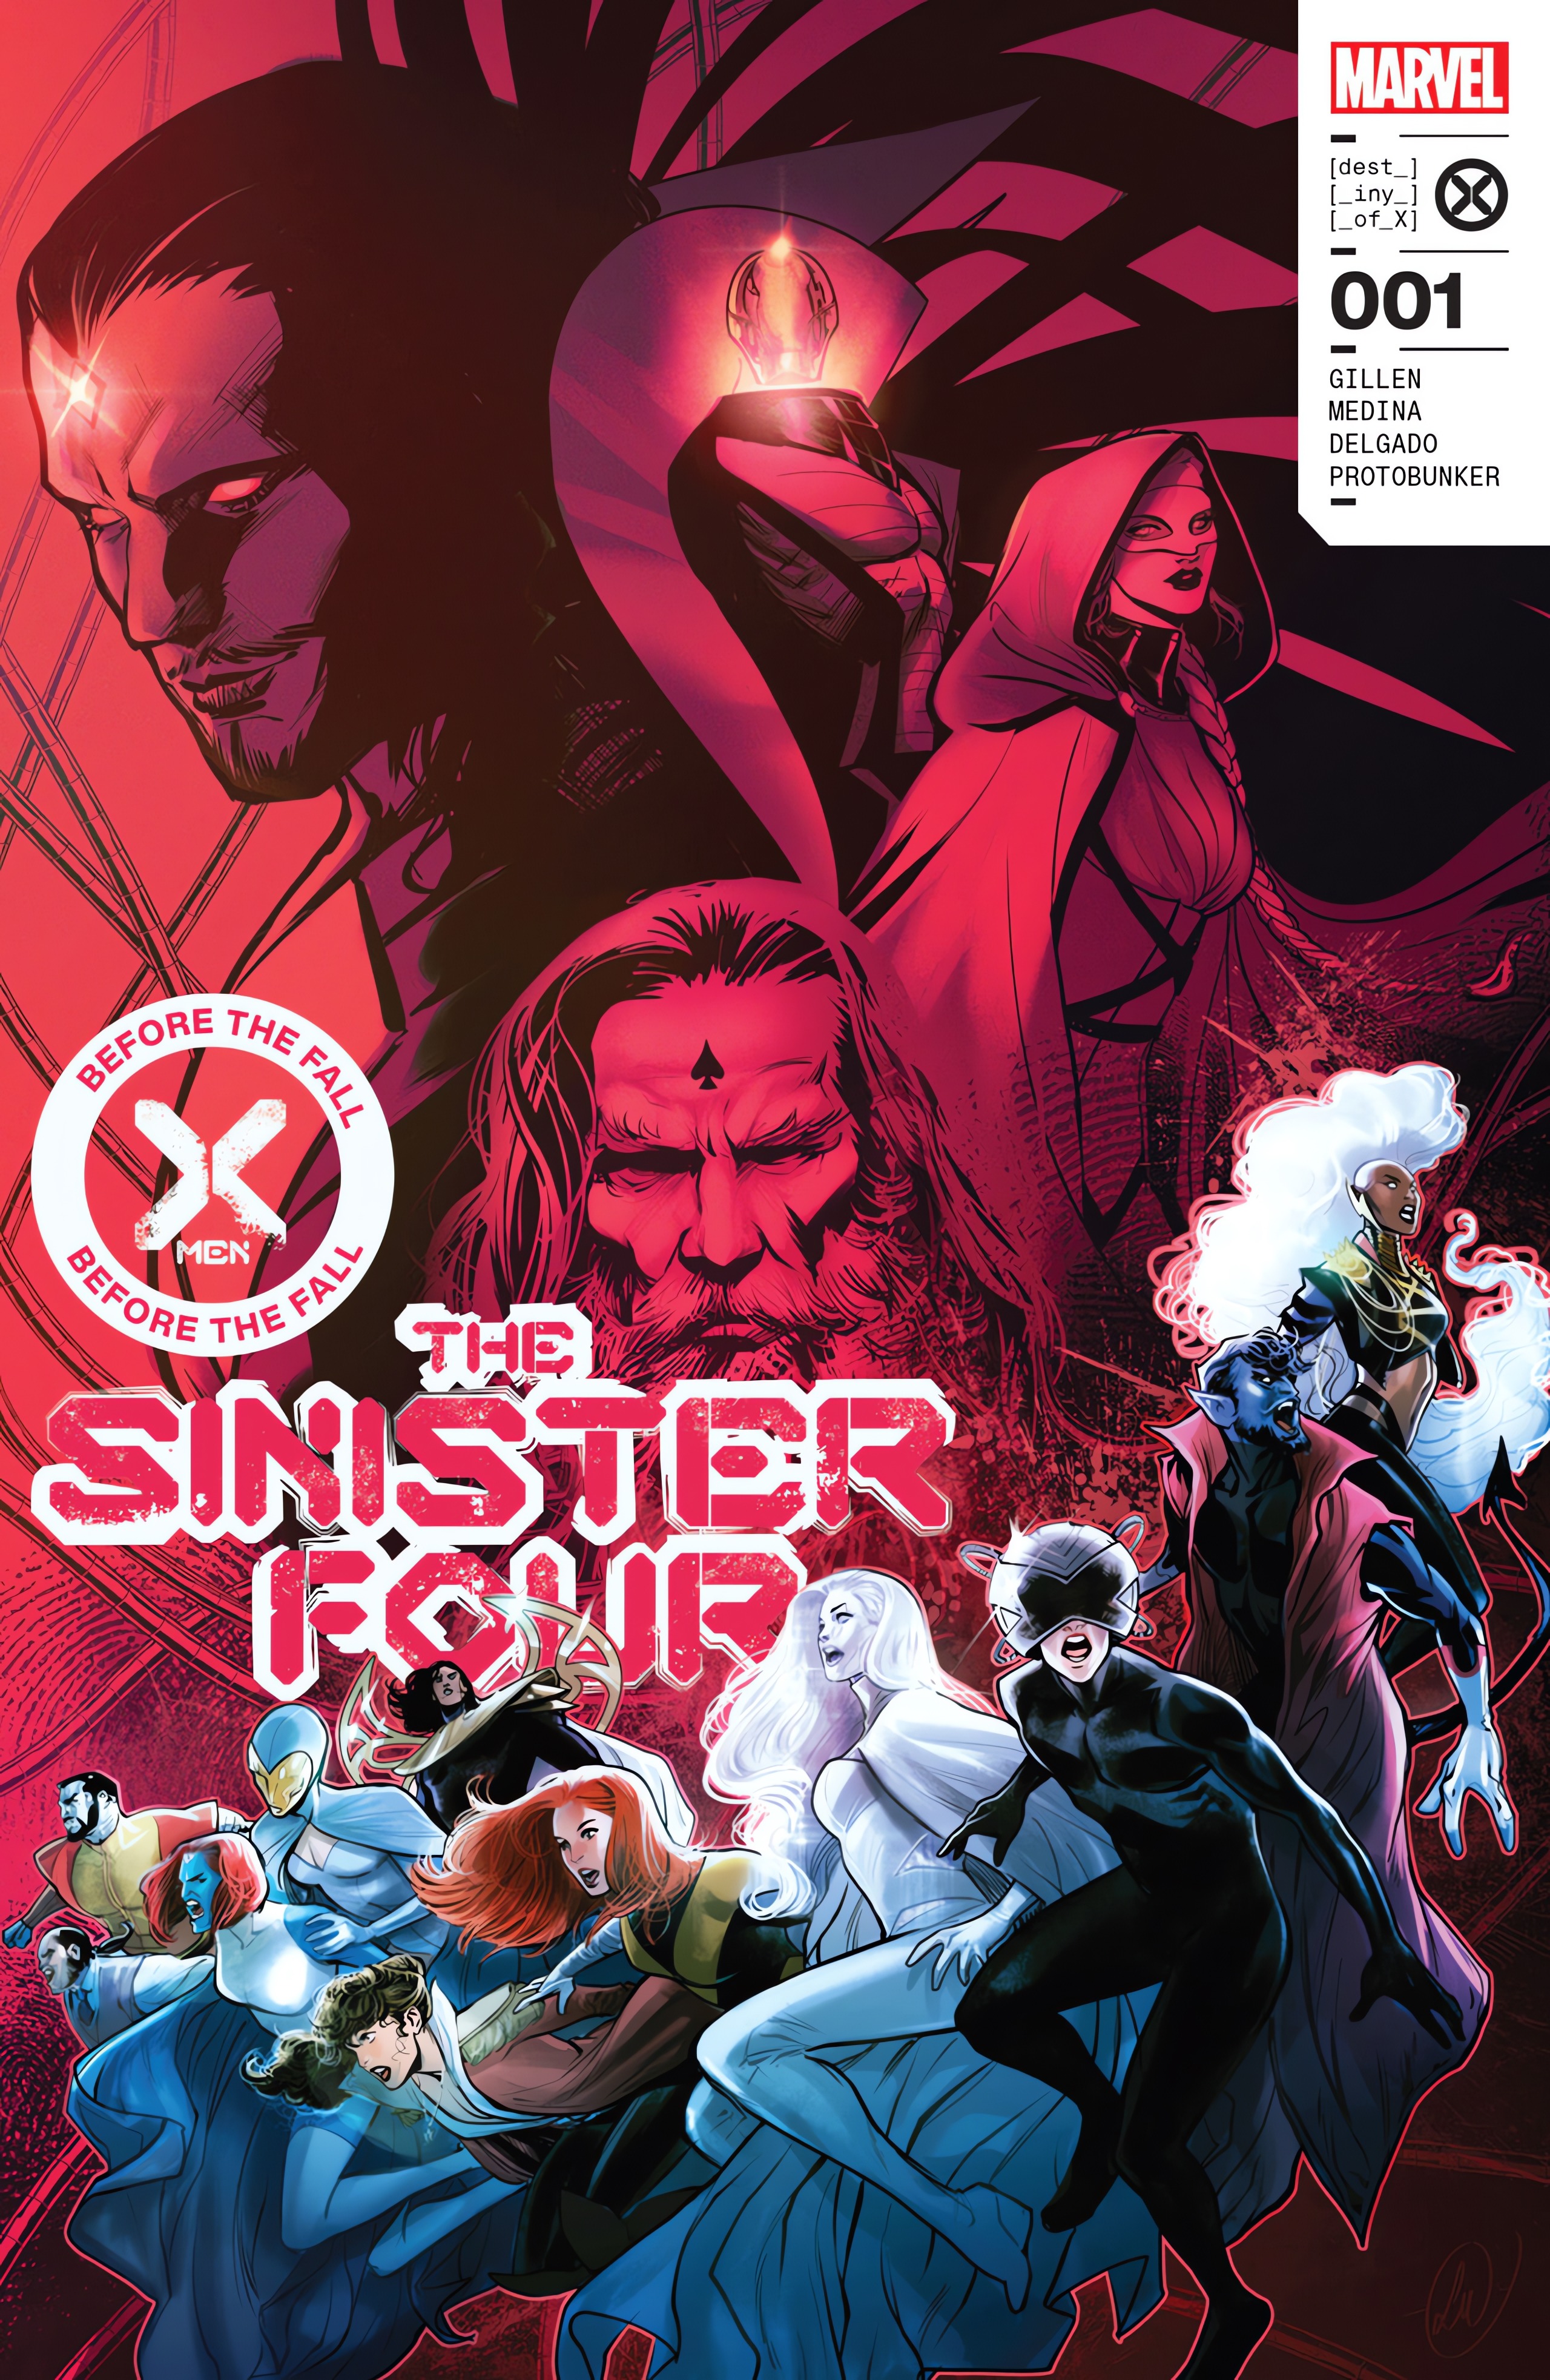 Read online X-Men: Before the Fall comic -  Issue # The Sinister Four - 1